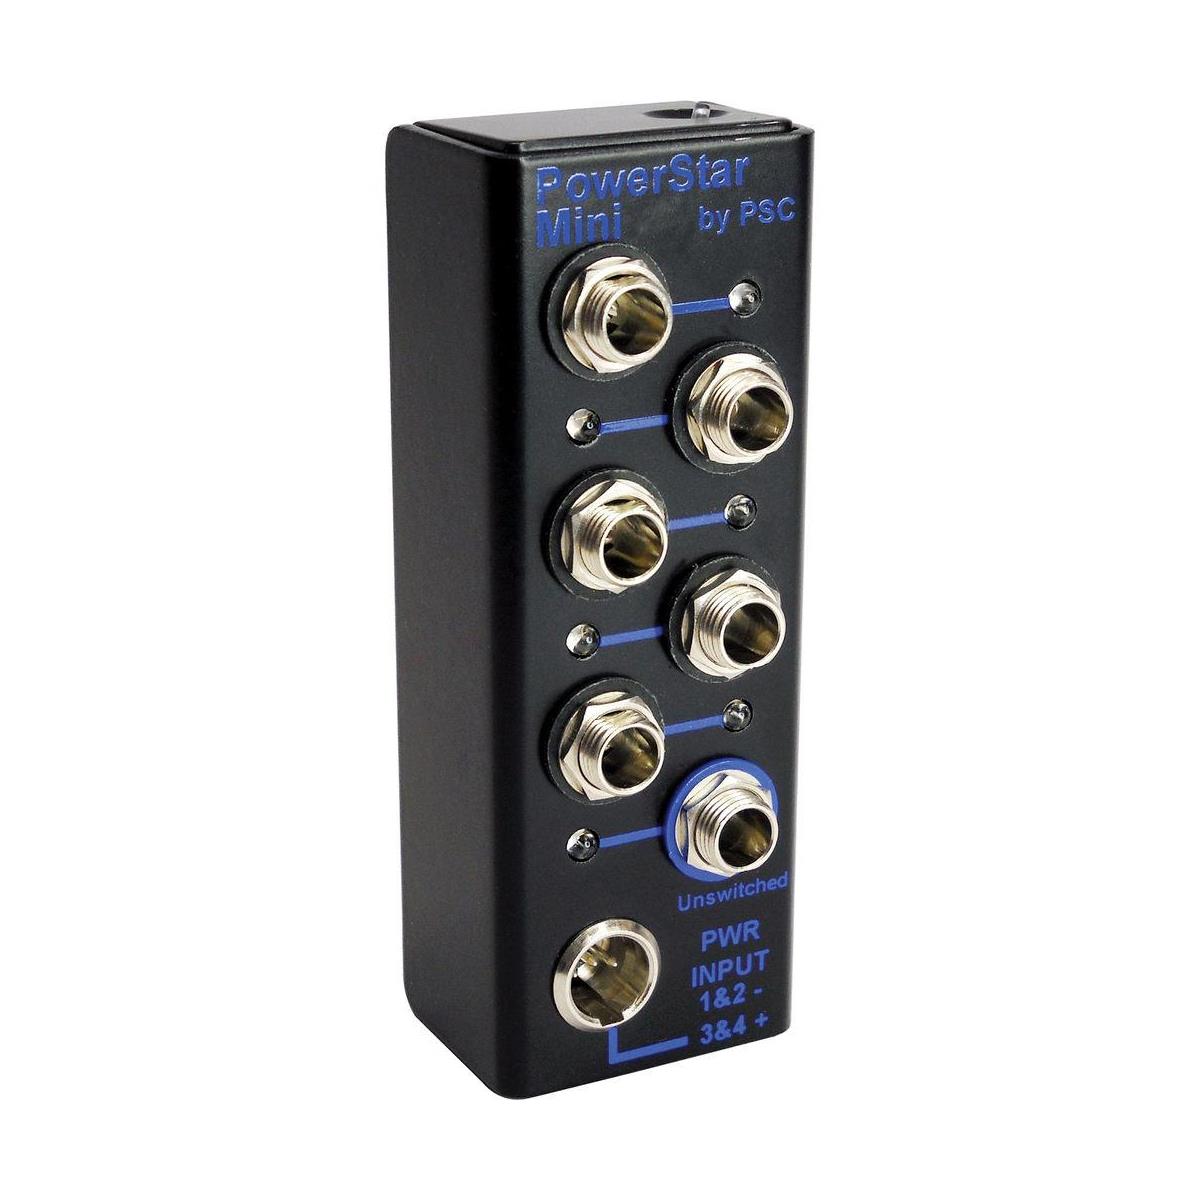 Image of PSC Power Star Mini Power Distribution System for ENG Audio Equipment